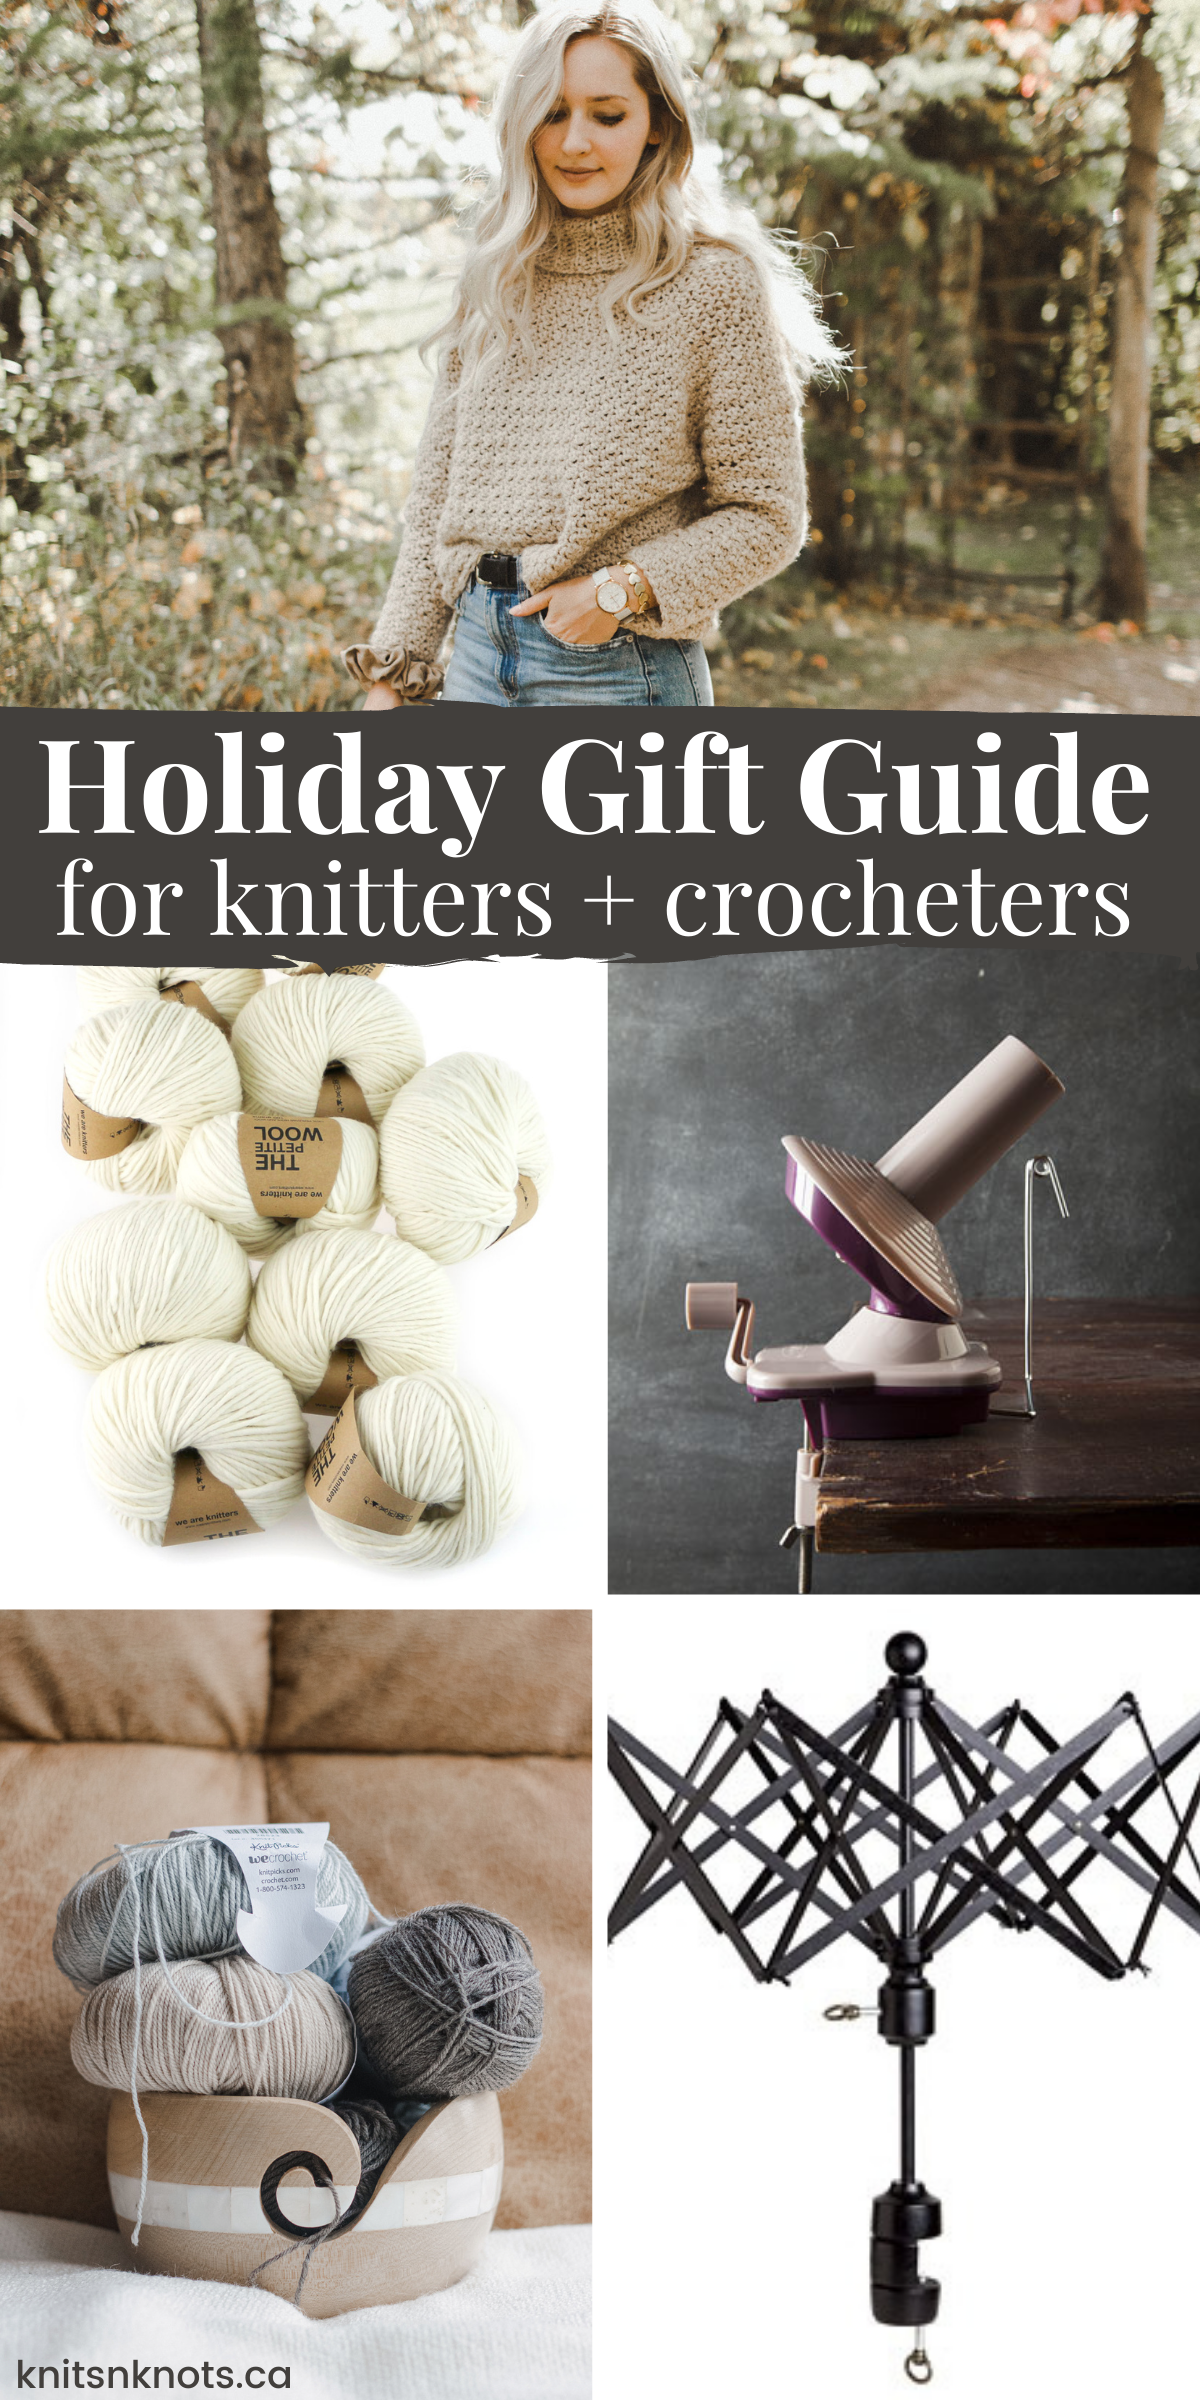 21 Free Quick and Easy Crochet Christmas Gift Ideas - Annie Design Crochet